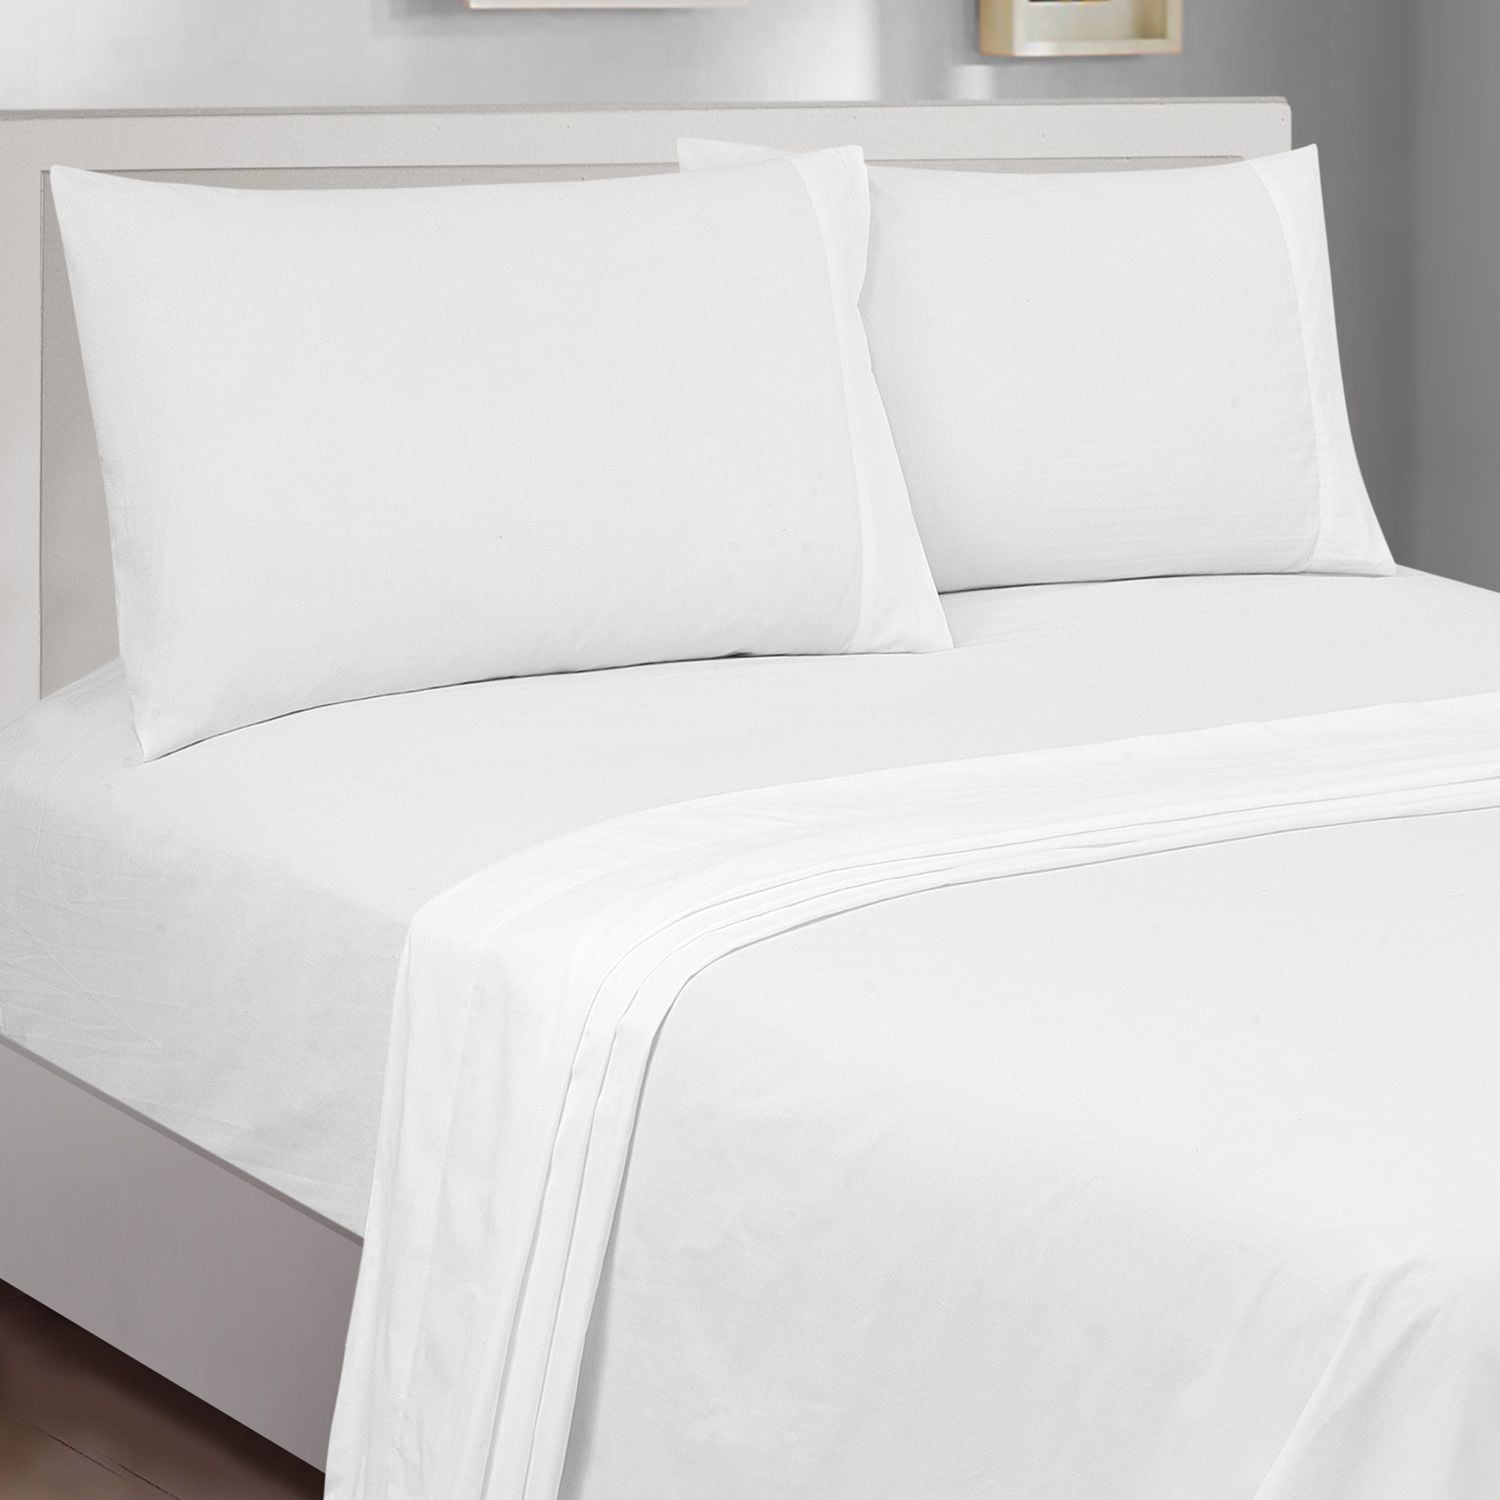 Mainstays 300 Thread Count Easy Care Percale Pillowcase Set of 2 ...